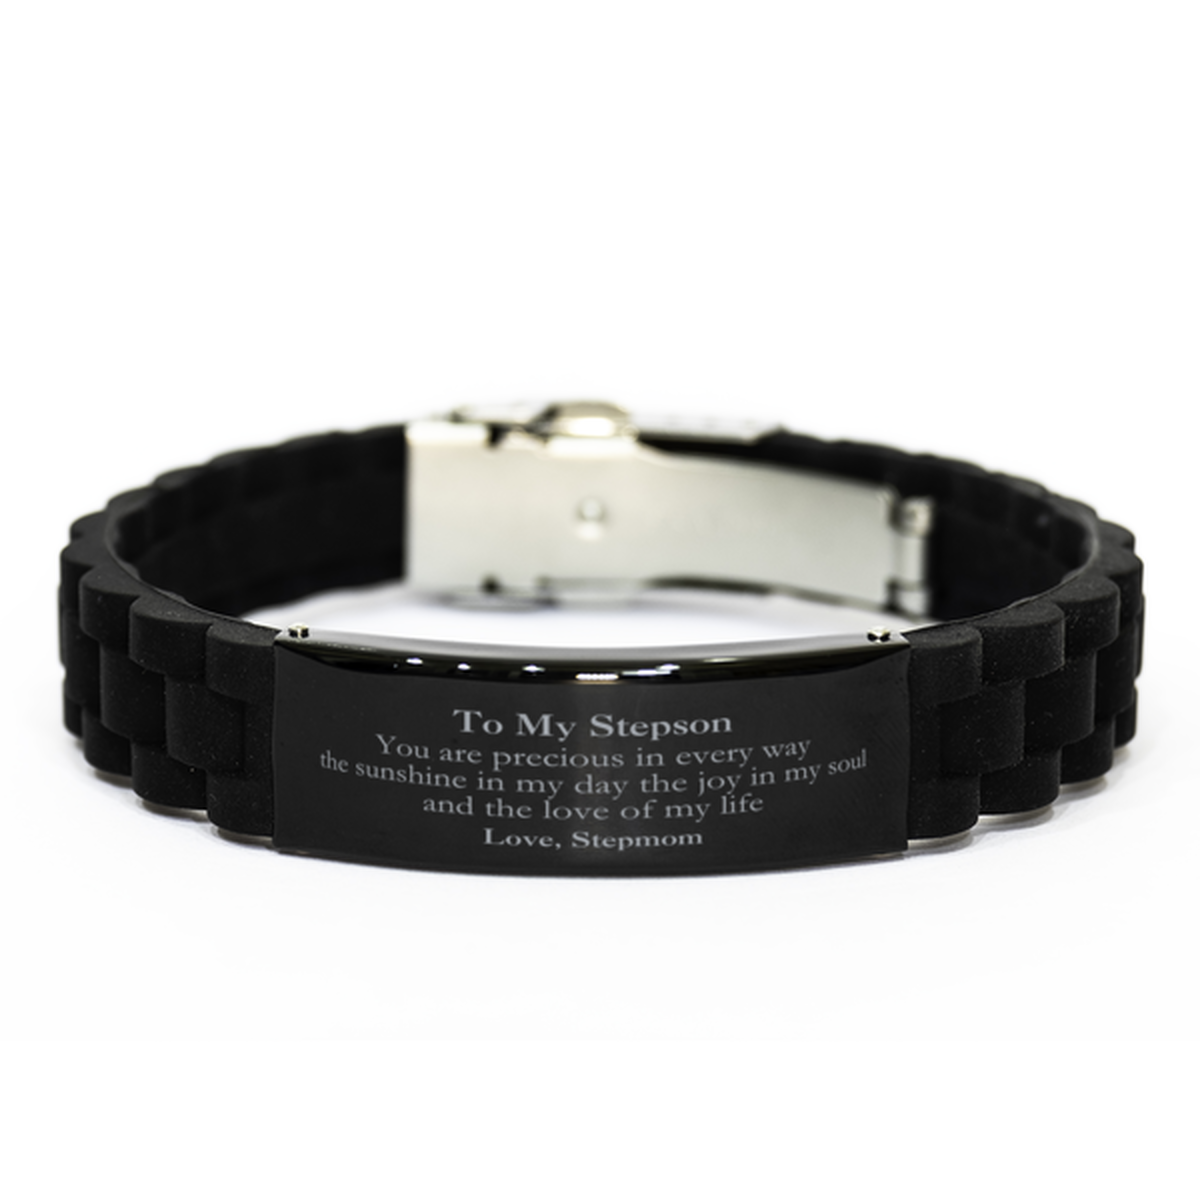 Graduation Gifts for Stepson Black Glidelock Clasp Bracelet Present from Stepmom, Christmas Stepson Birthday Gifts Stepson You are precious in every way the sunshine in my day. Love, Stepmom